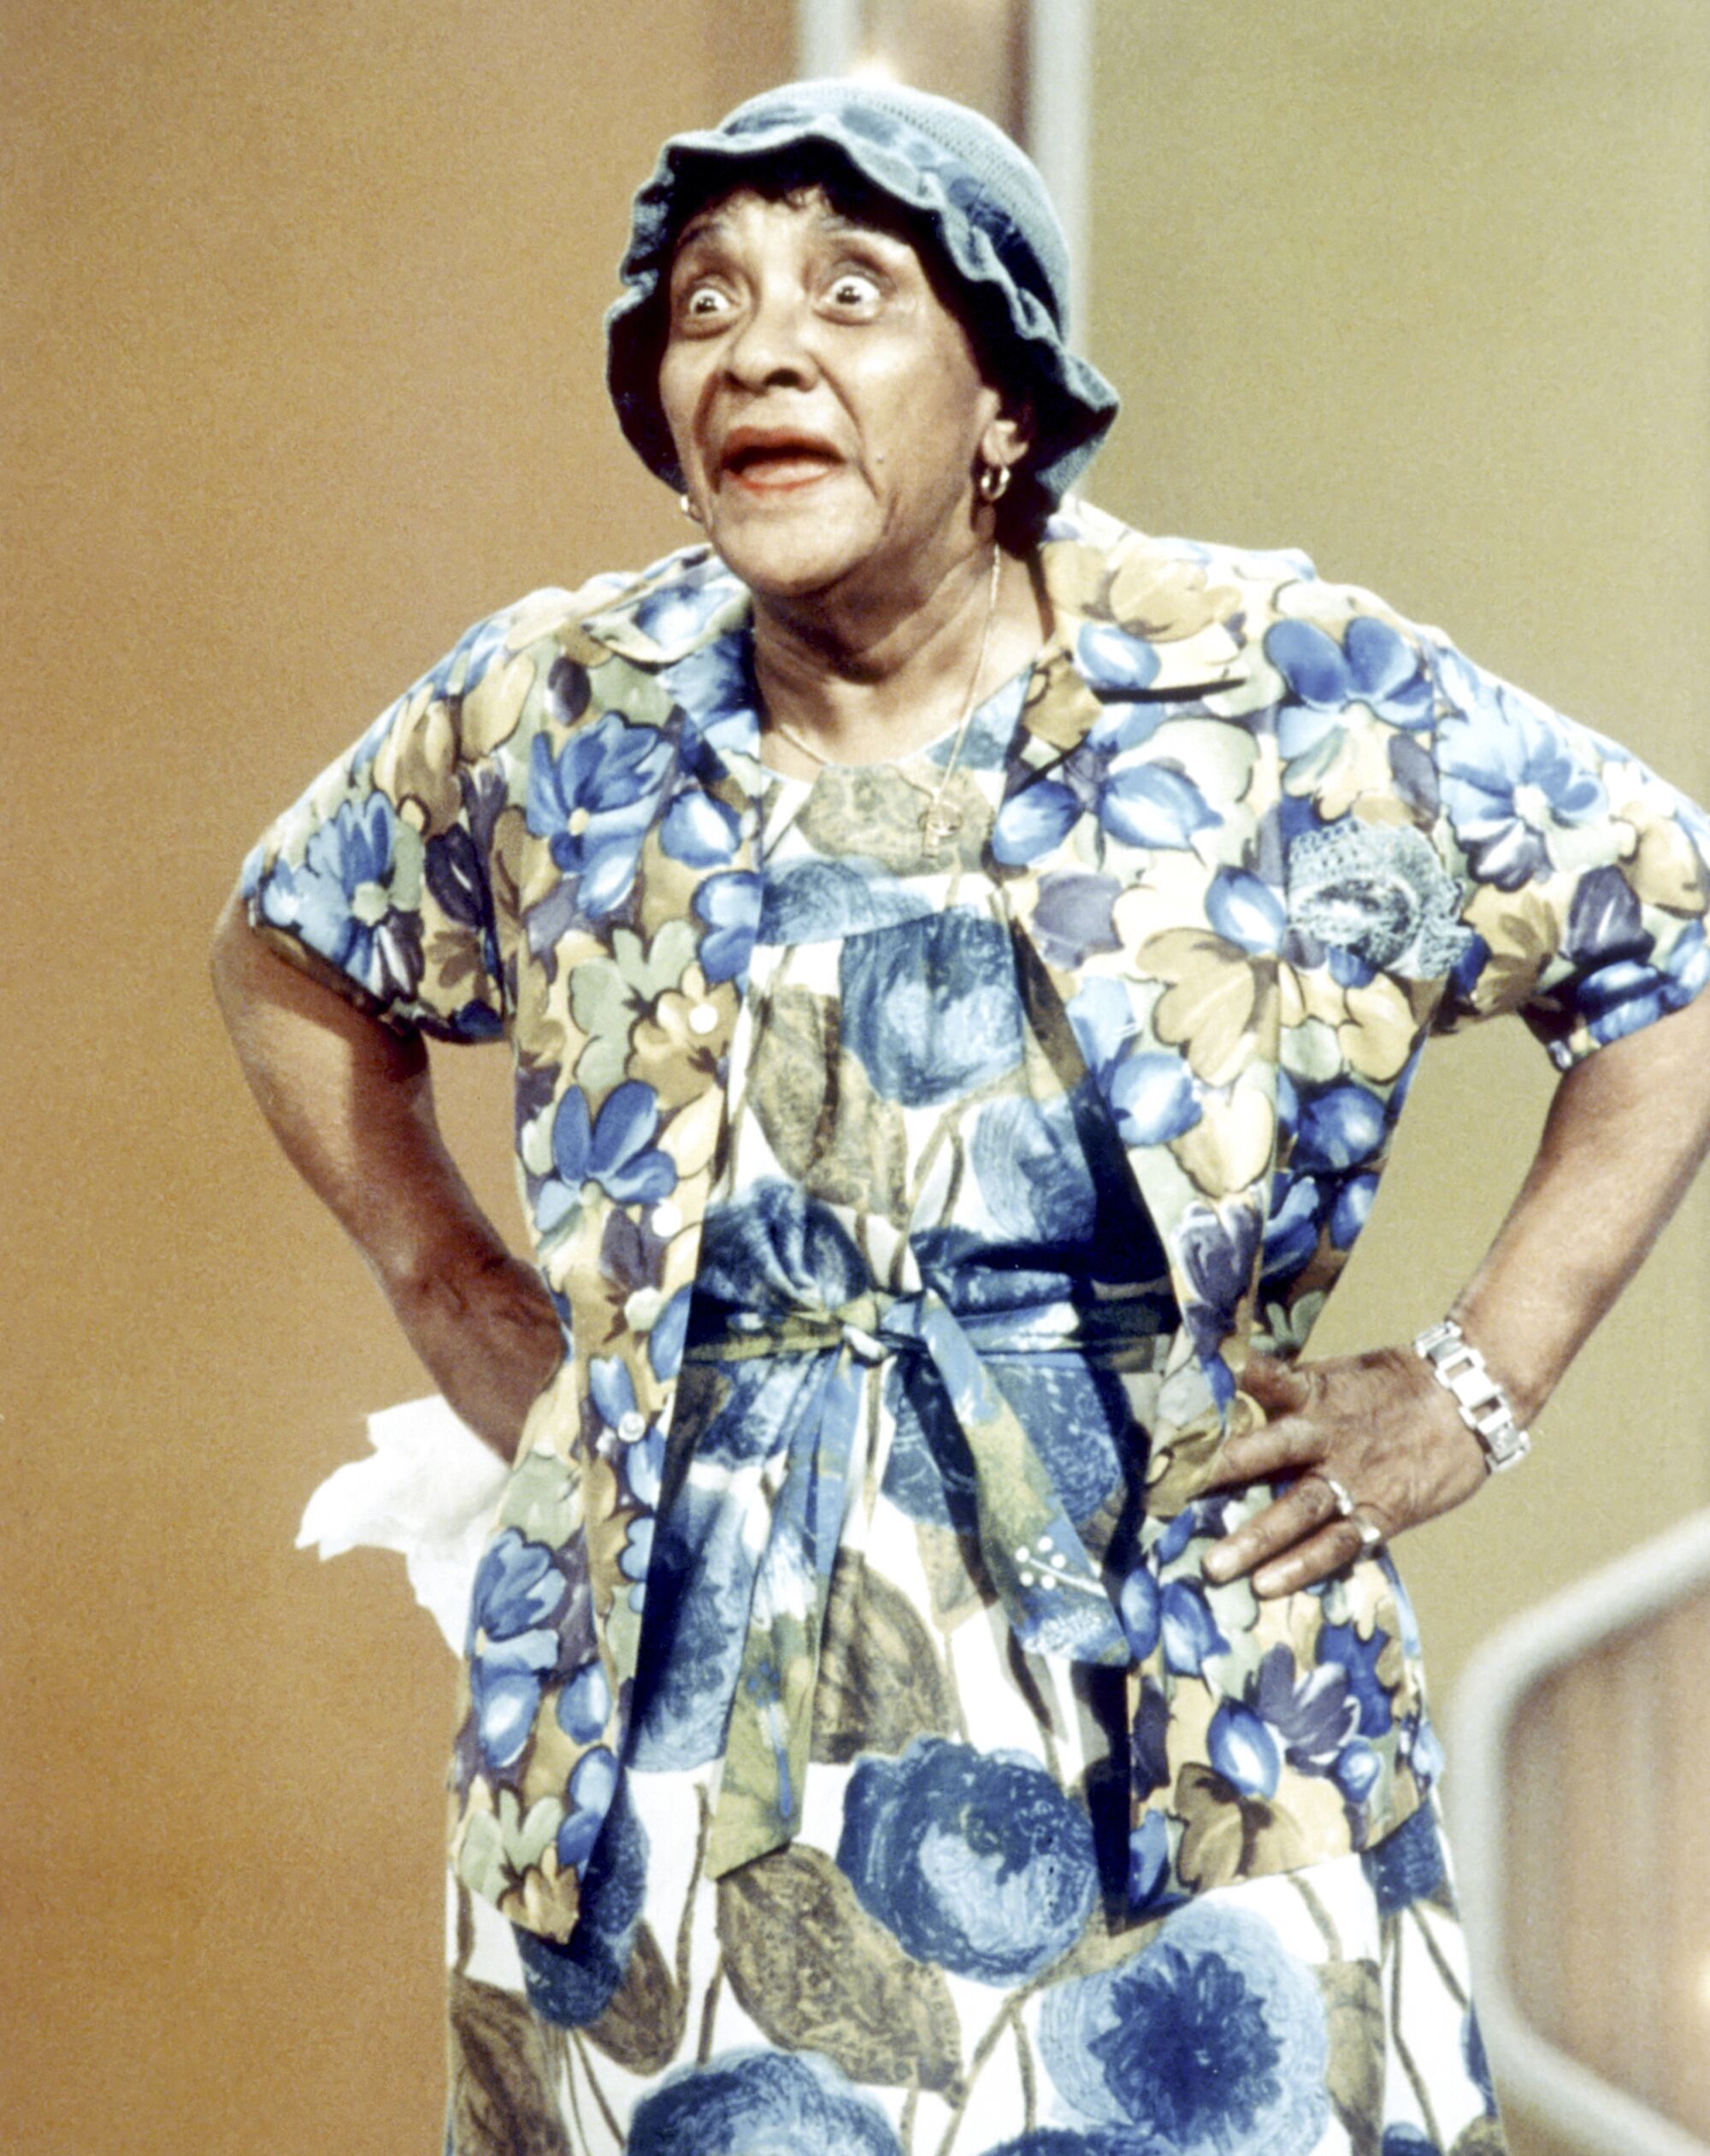  Moms Mabley stands with her hands on her hips